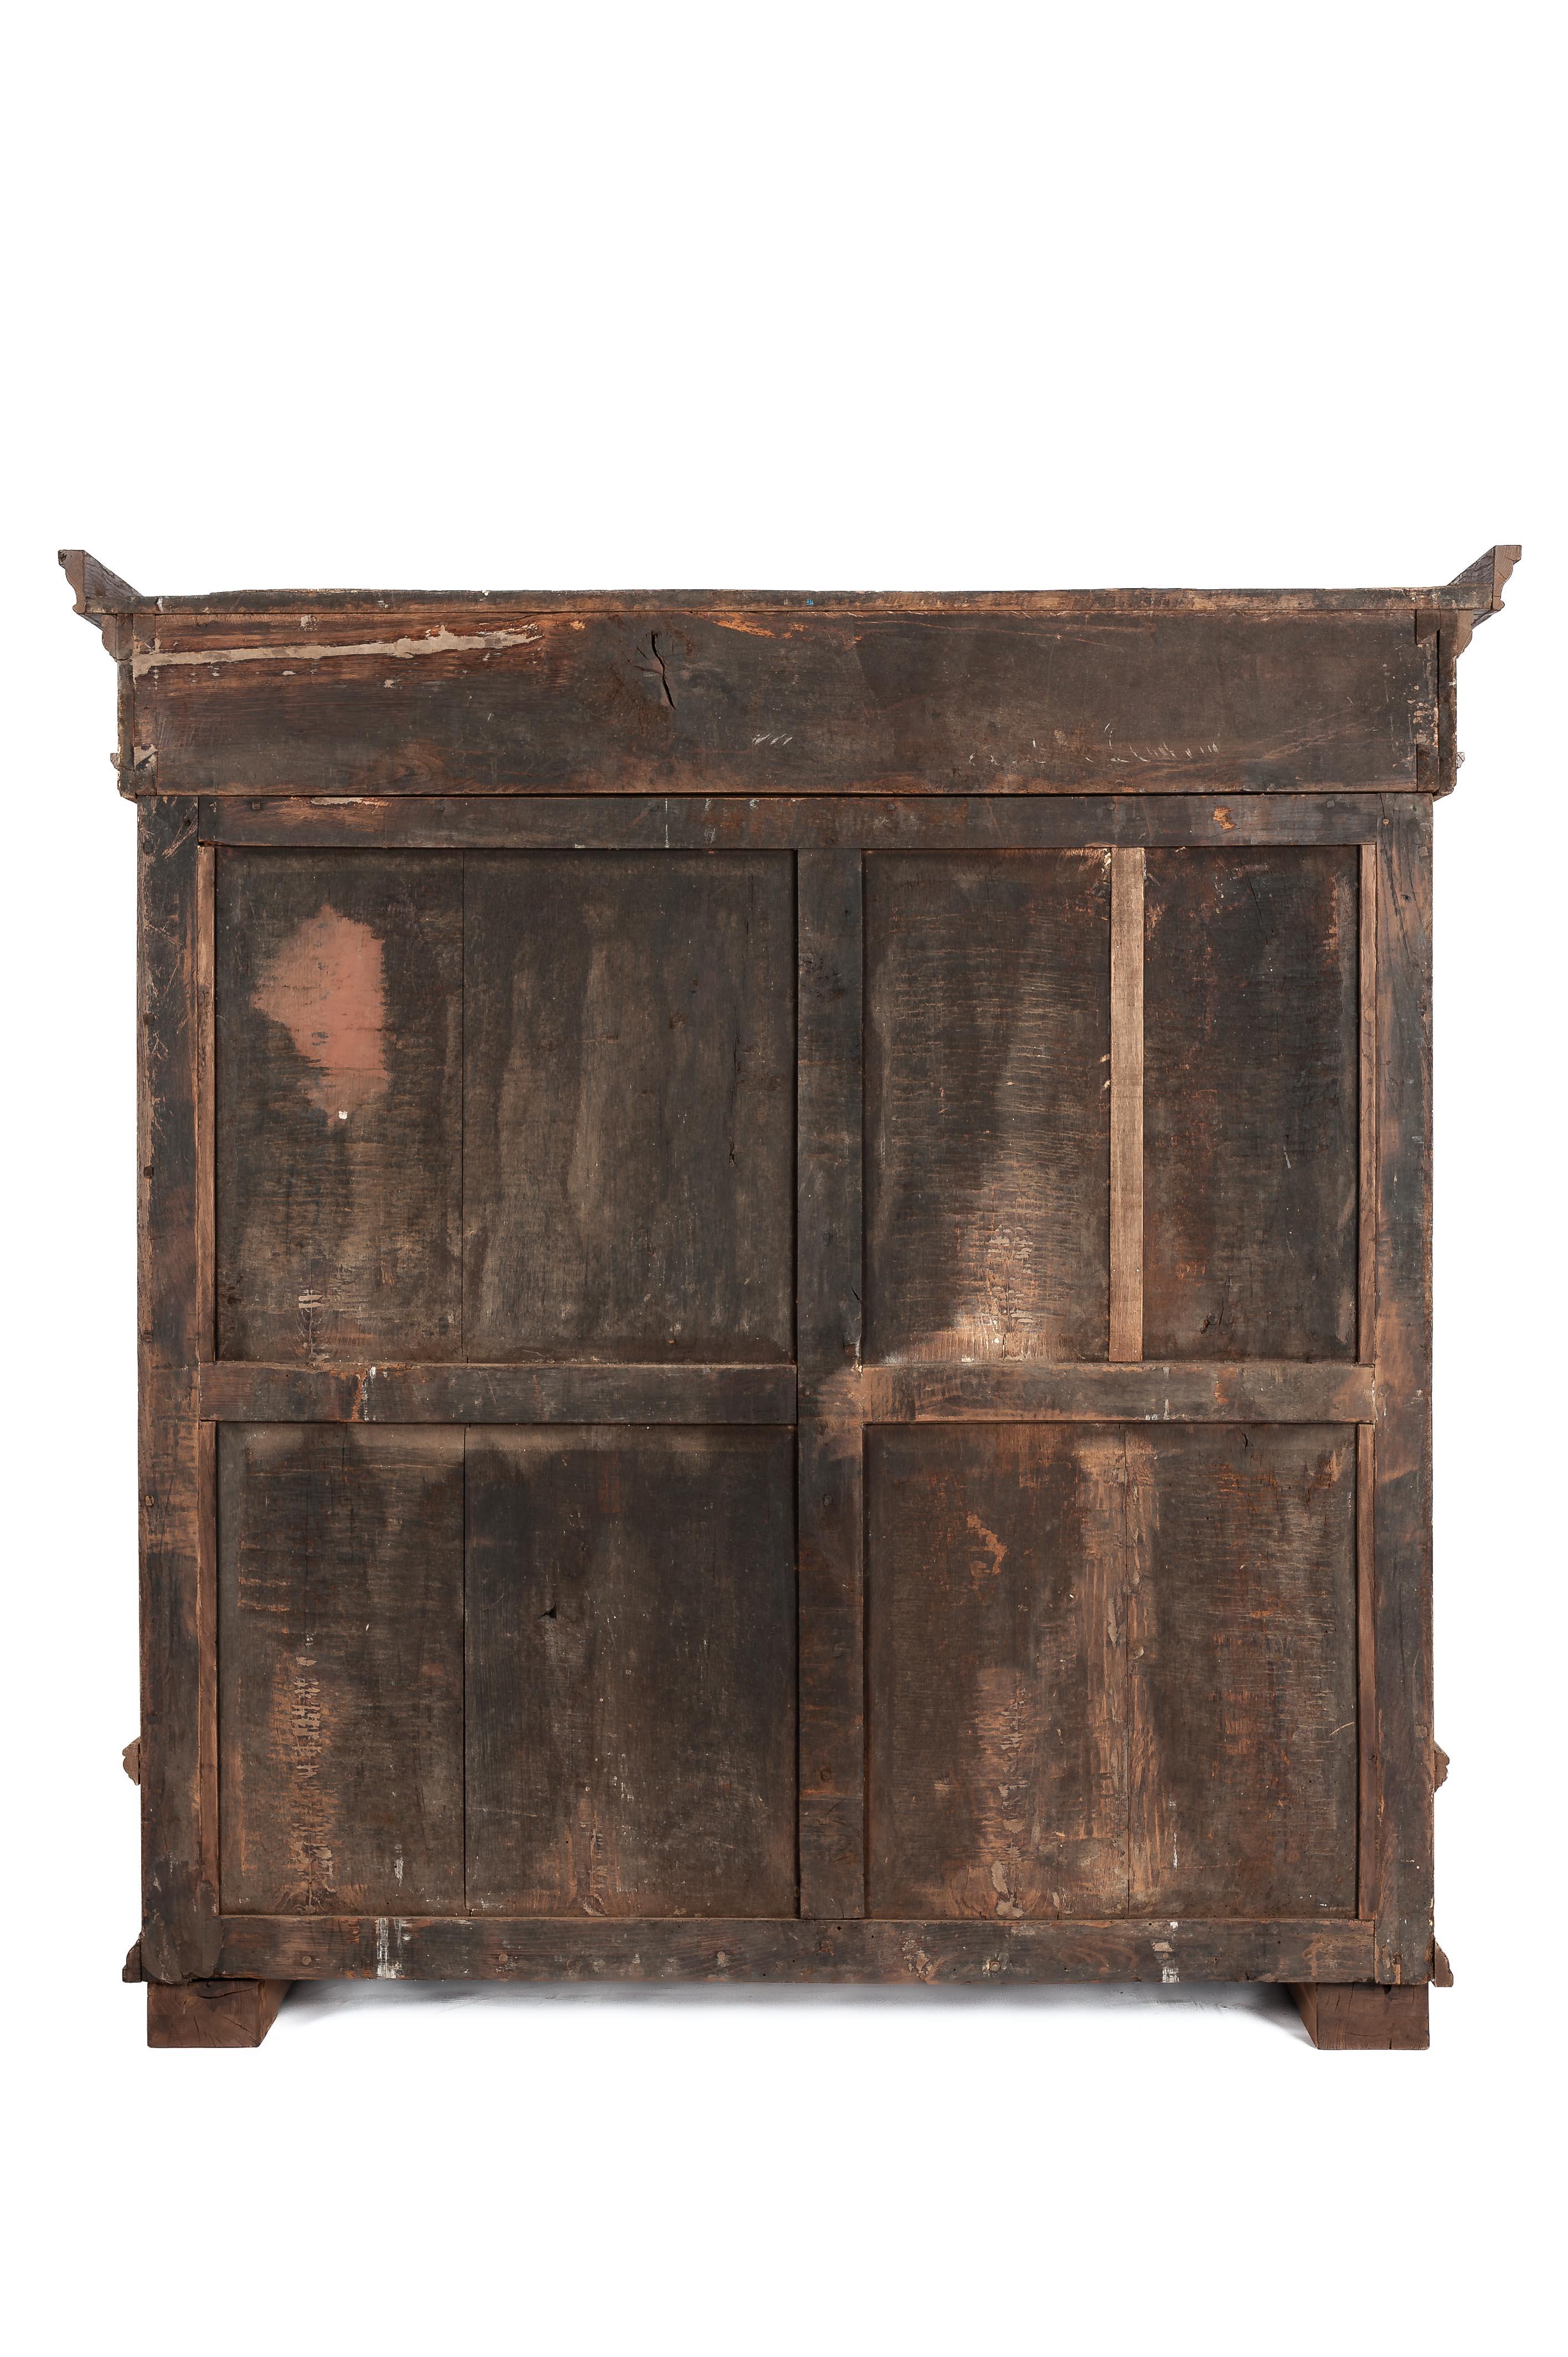 Carved Antique early 18th Century German Baroque Stripped Oak Two-Door Wardrobe Cabinet For Sale